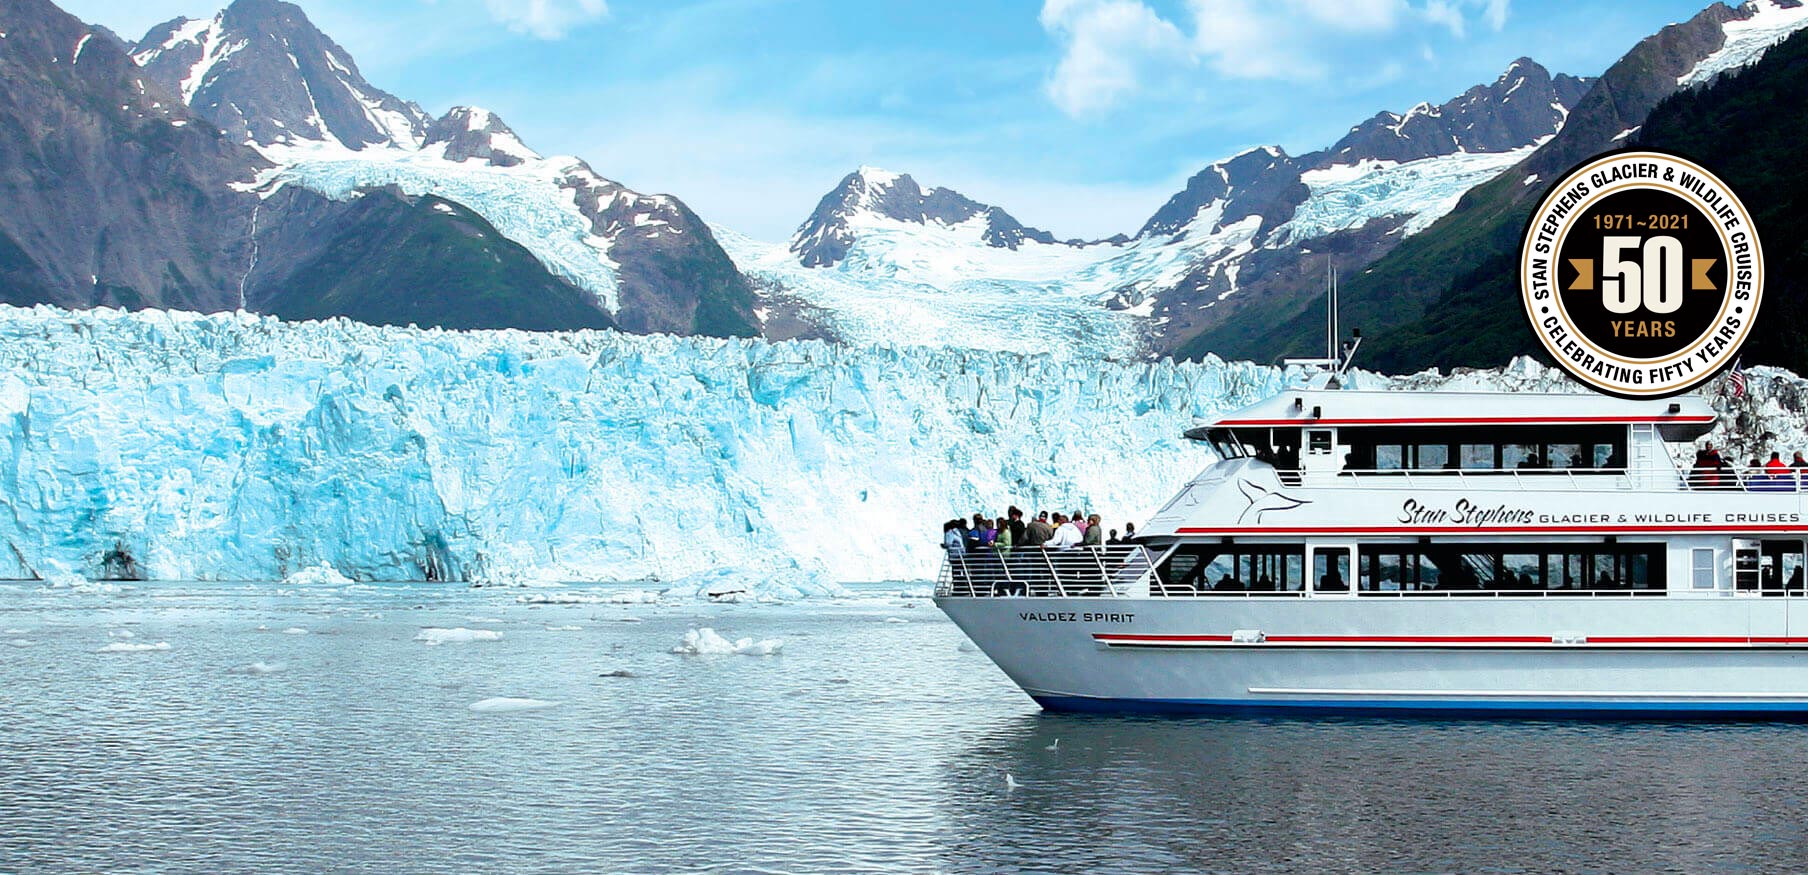 Cruise ship in front of glacier and 50th Anniversary Seal